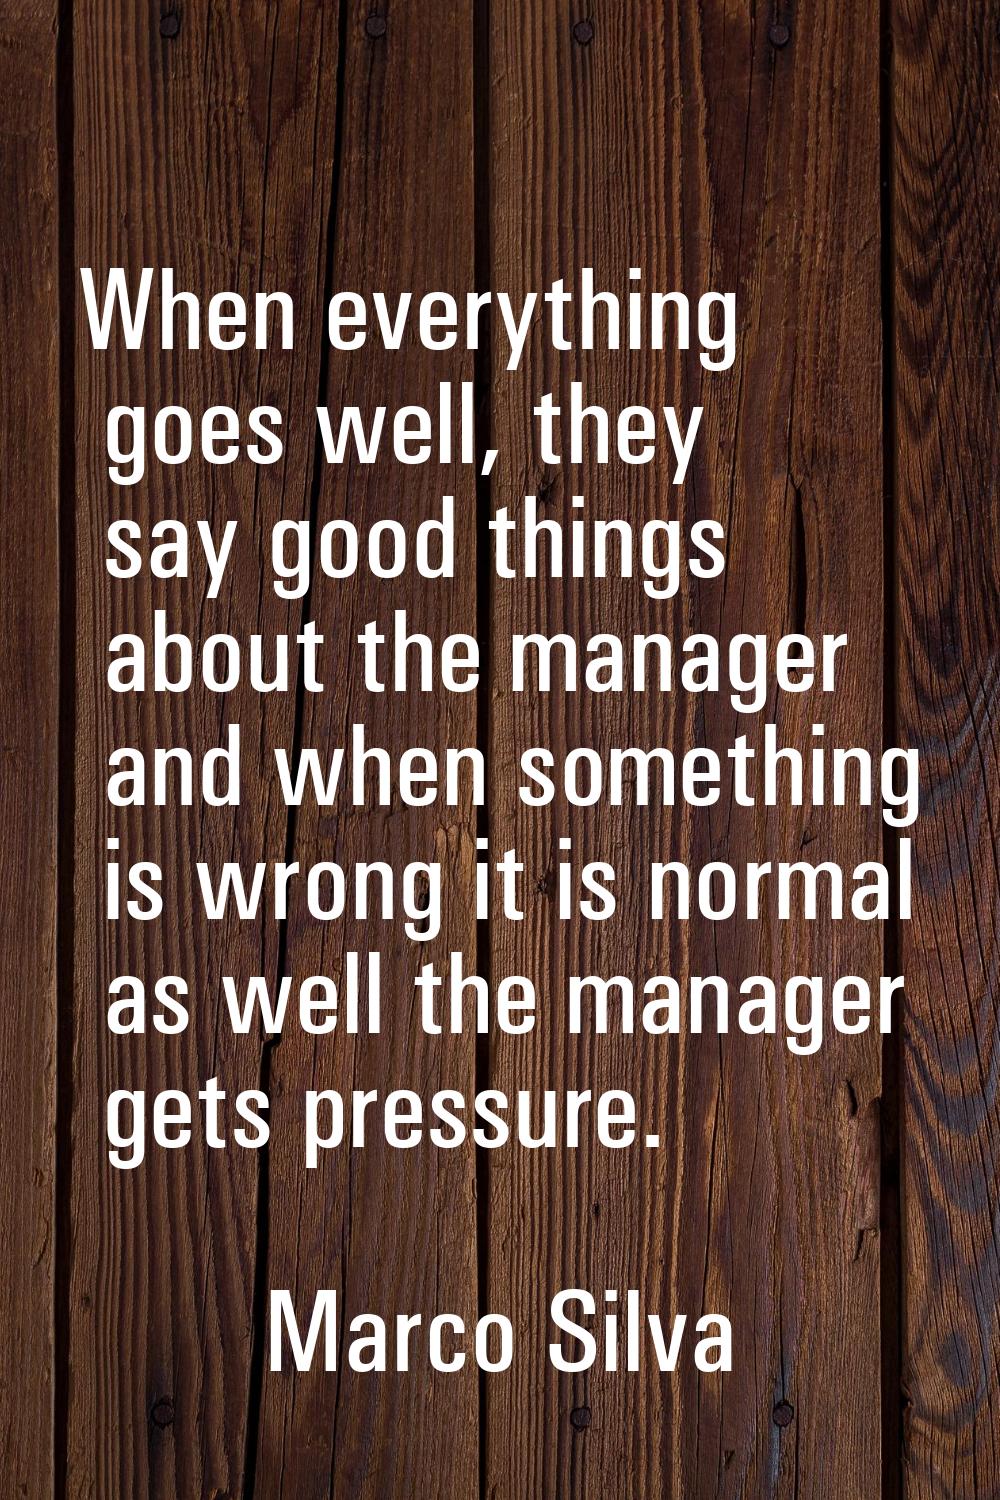 When everything goes well, they say good things about the manager and when something is wrong it is